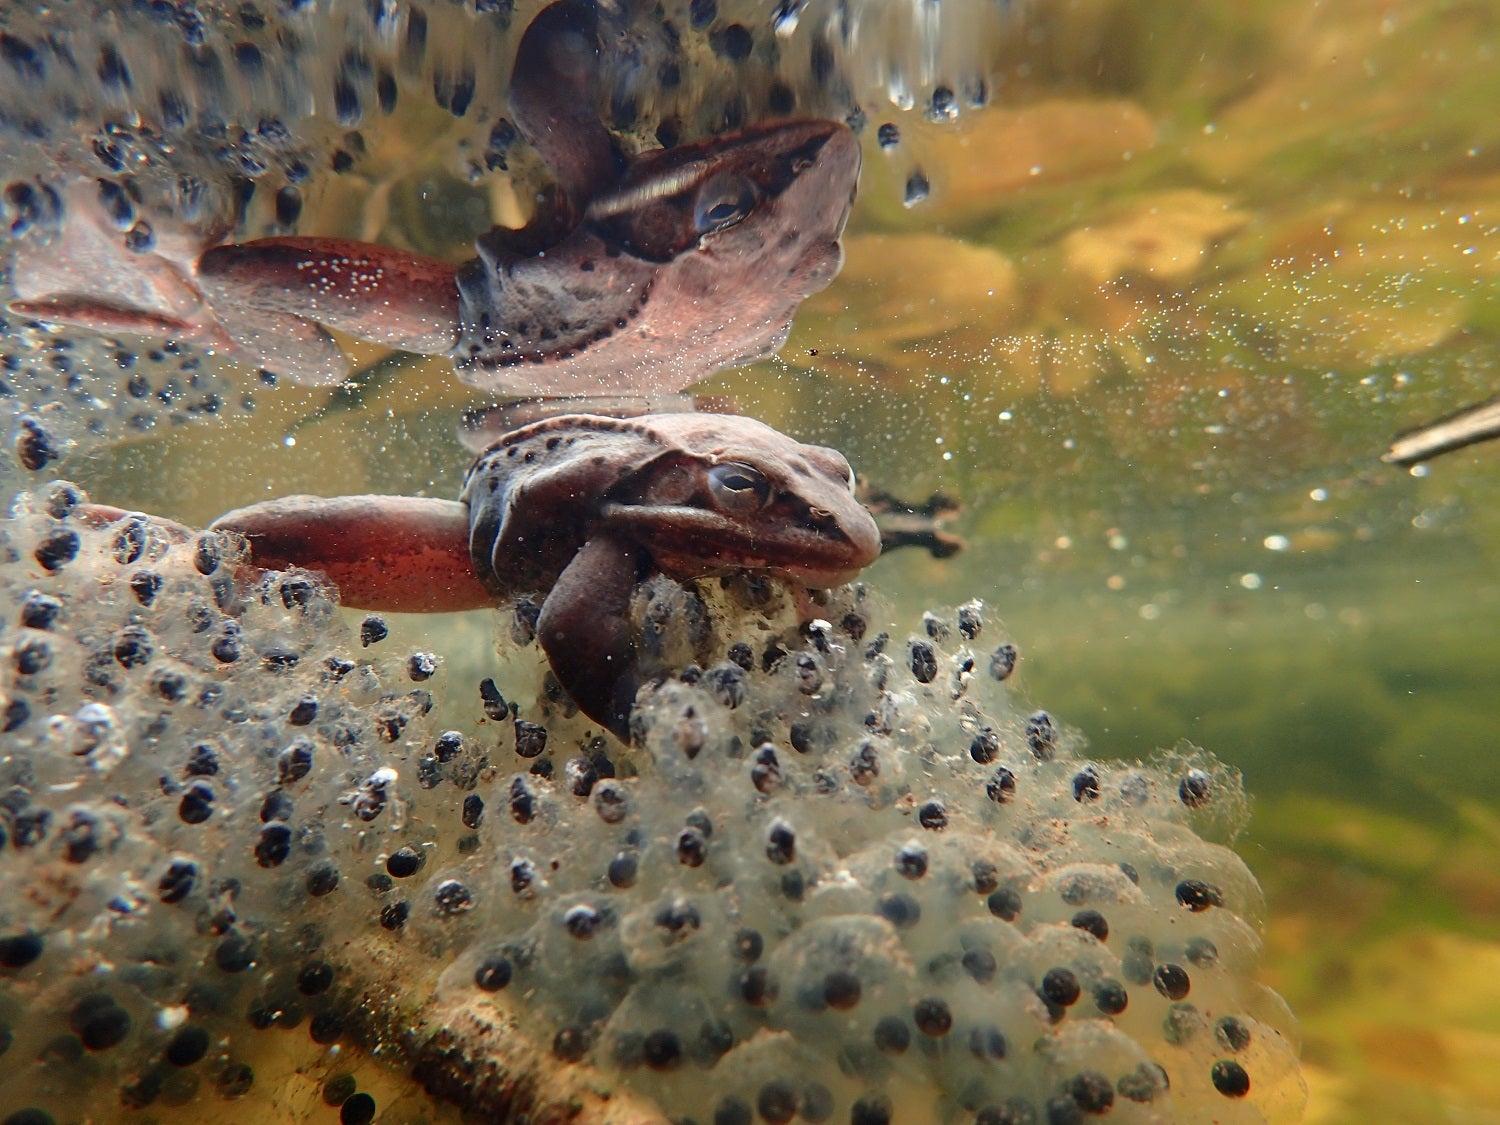 Male wood frog underwater with cluster of eggs